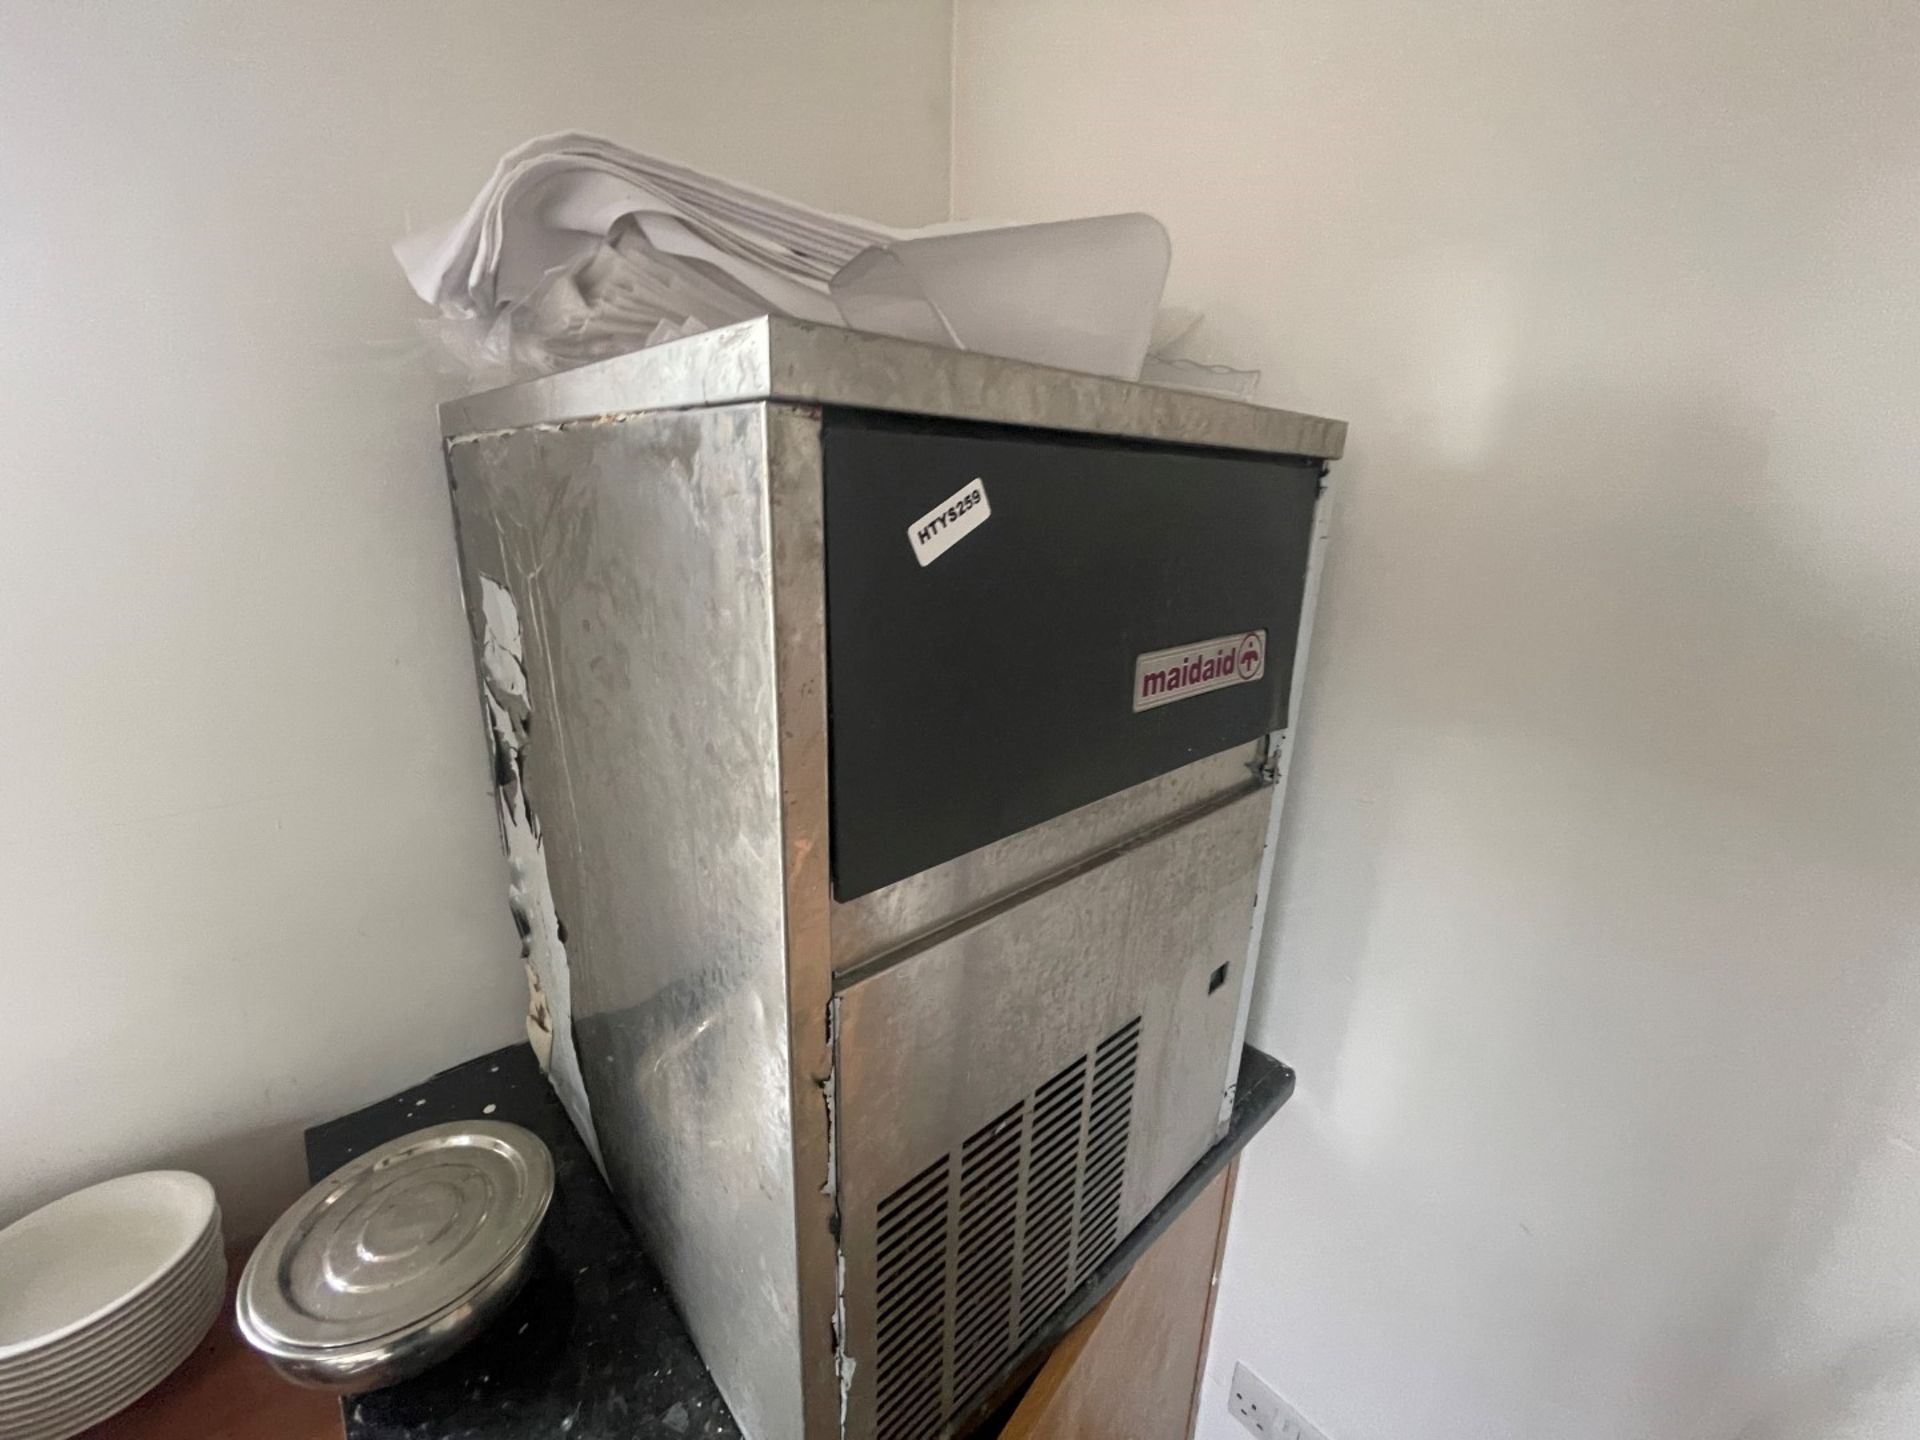 1 x Maidaid Countertop Ice Machine - Ref: HTYS259 - CL782 - Location: Leicester, LE2Collection - Image 2 of 5